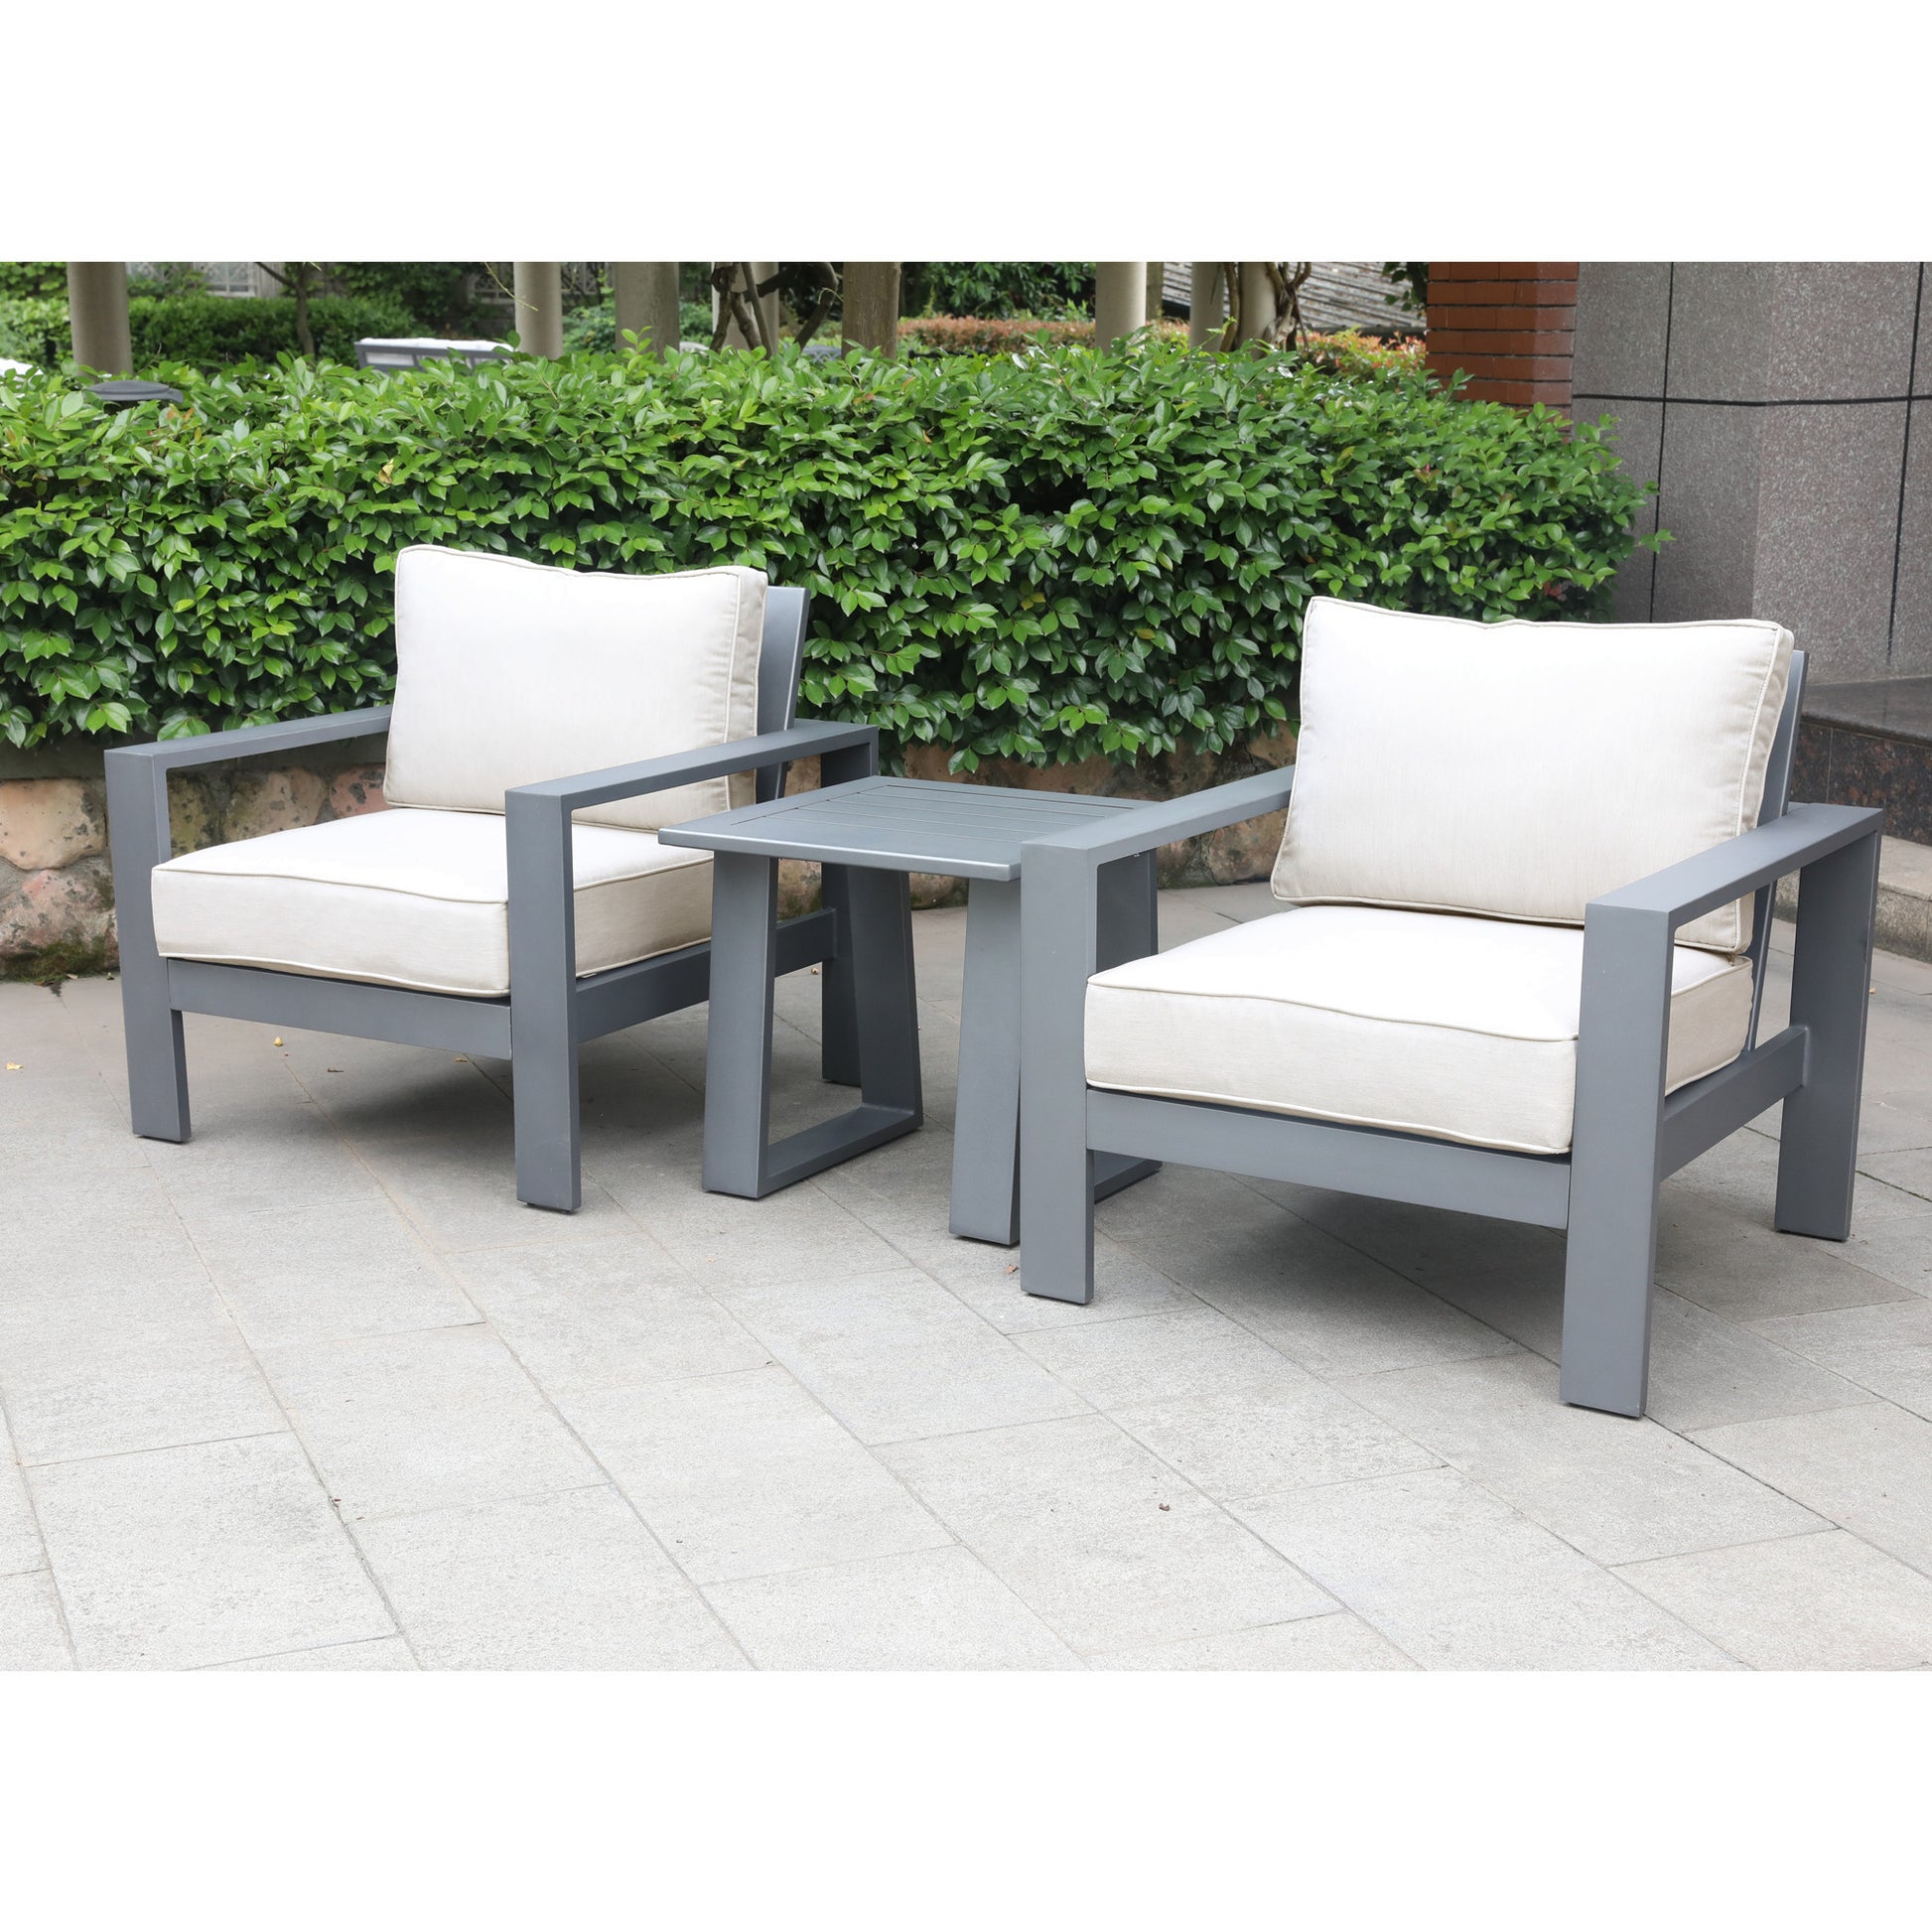 3 Piece Seating Group with Cushions, Powdered Pewter pewter-polyester-aluminum